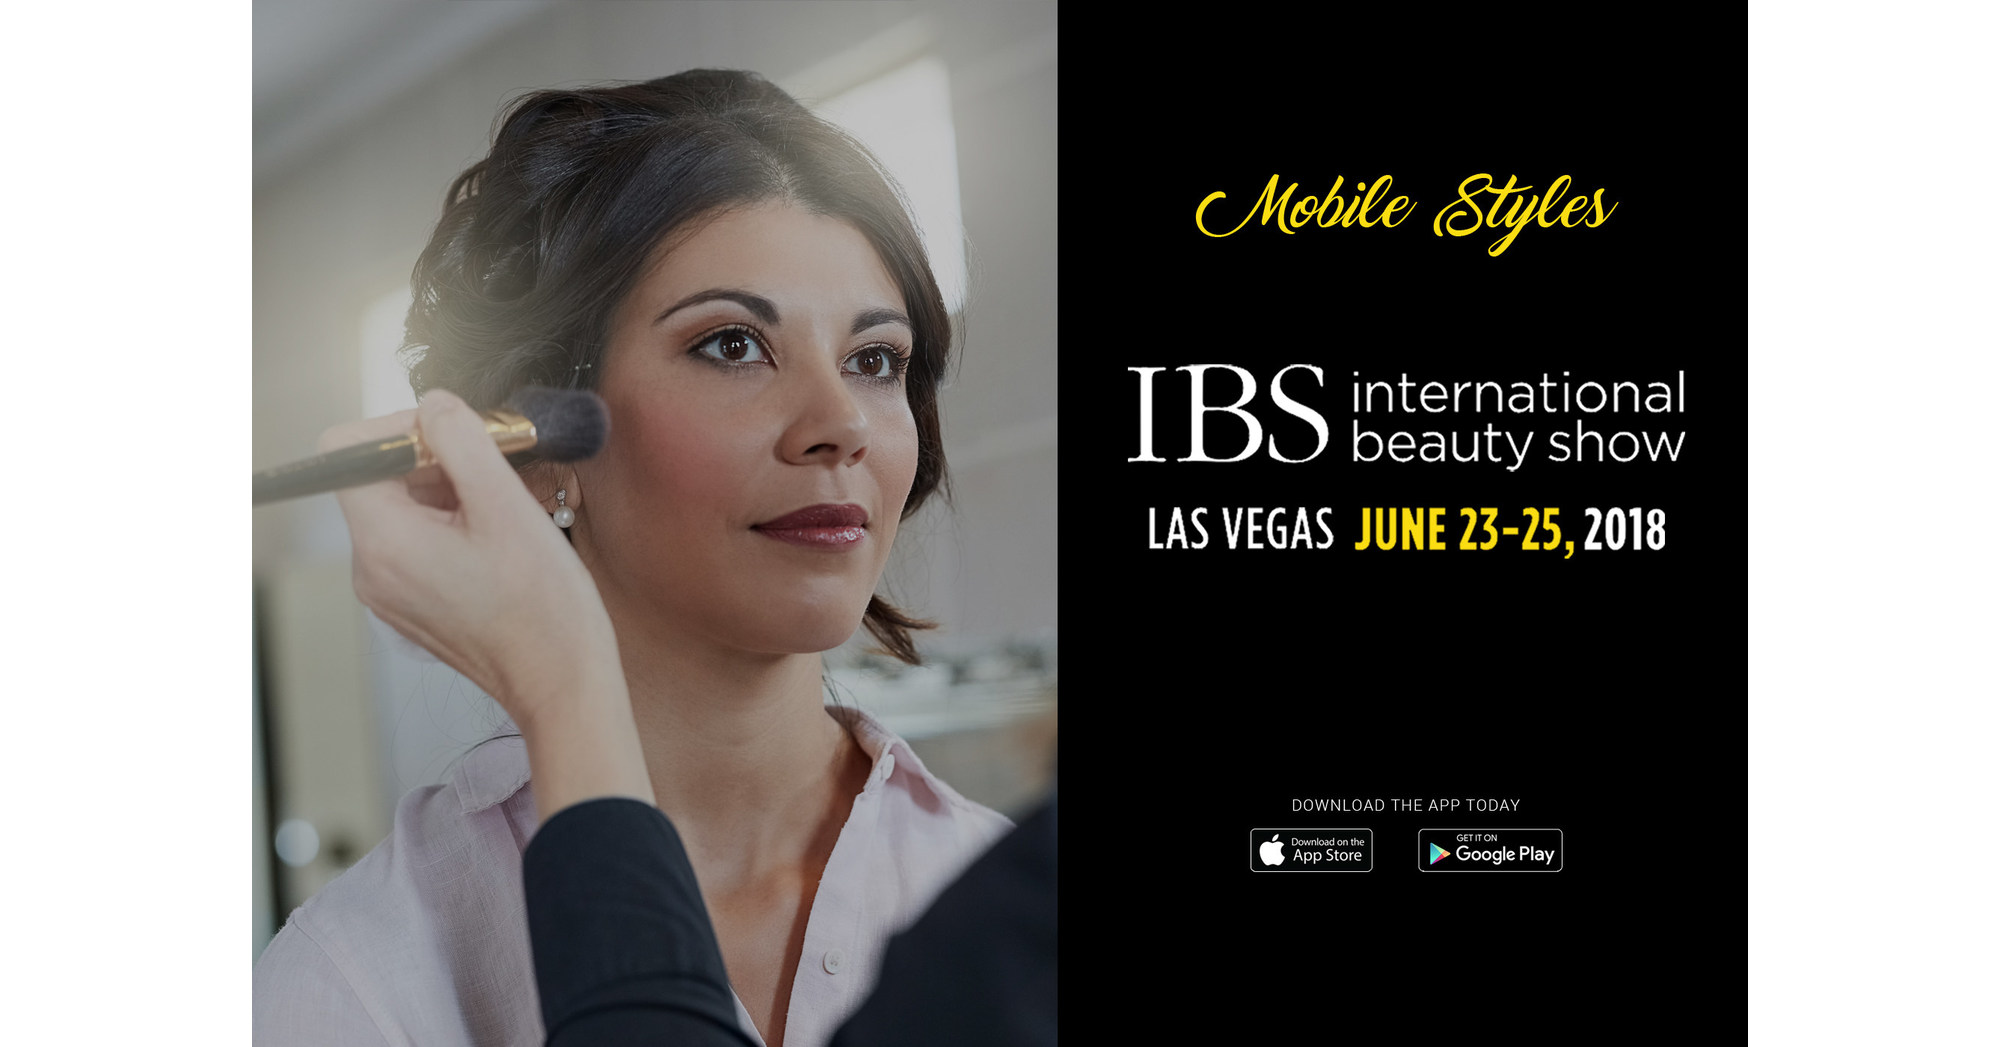 Las Vegas! Mobile Styles Will Be At The International Beauty Show To